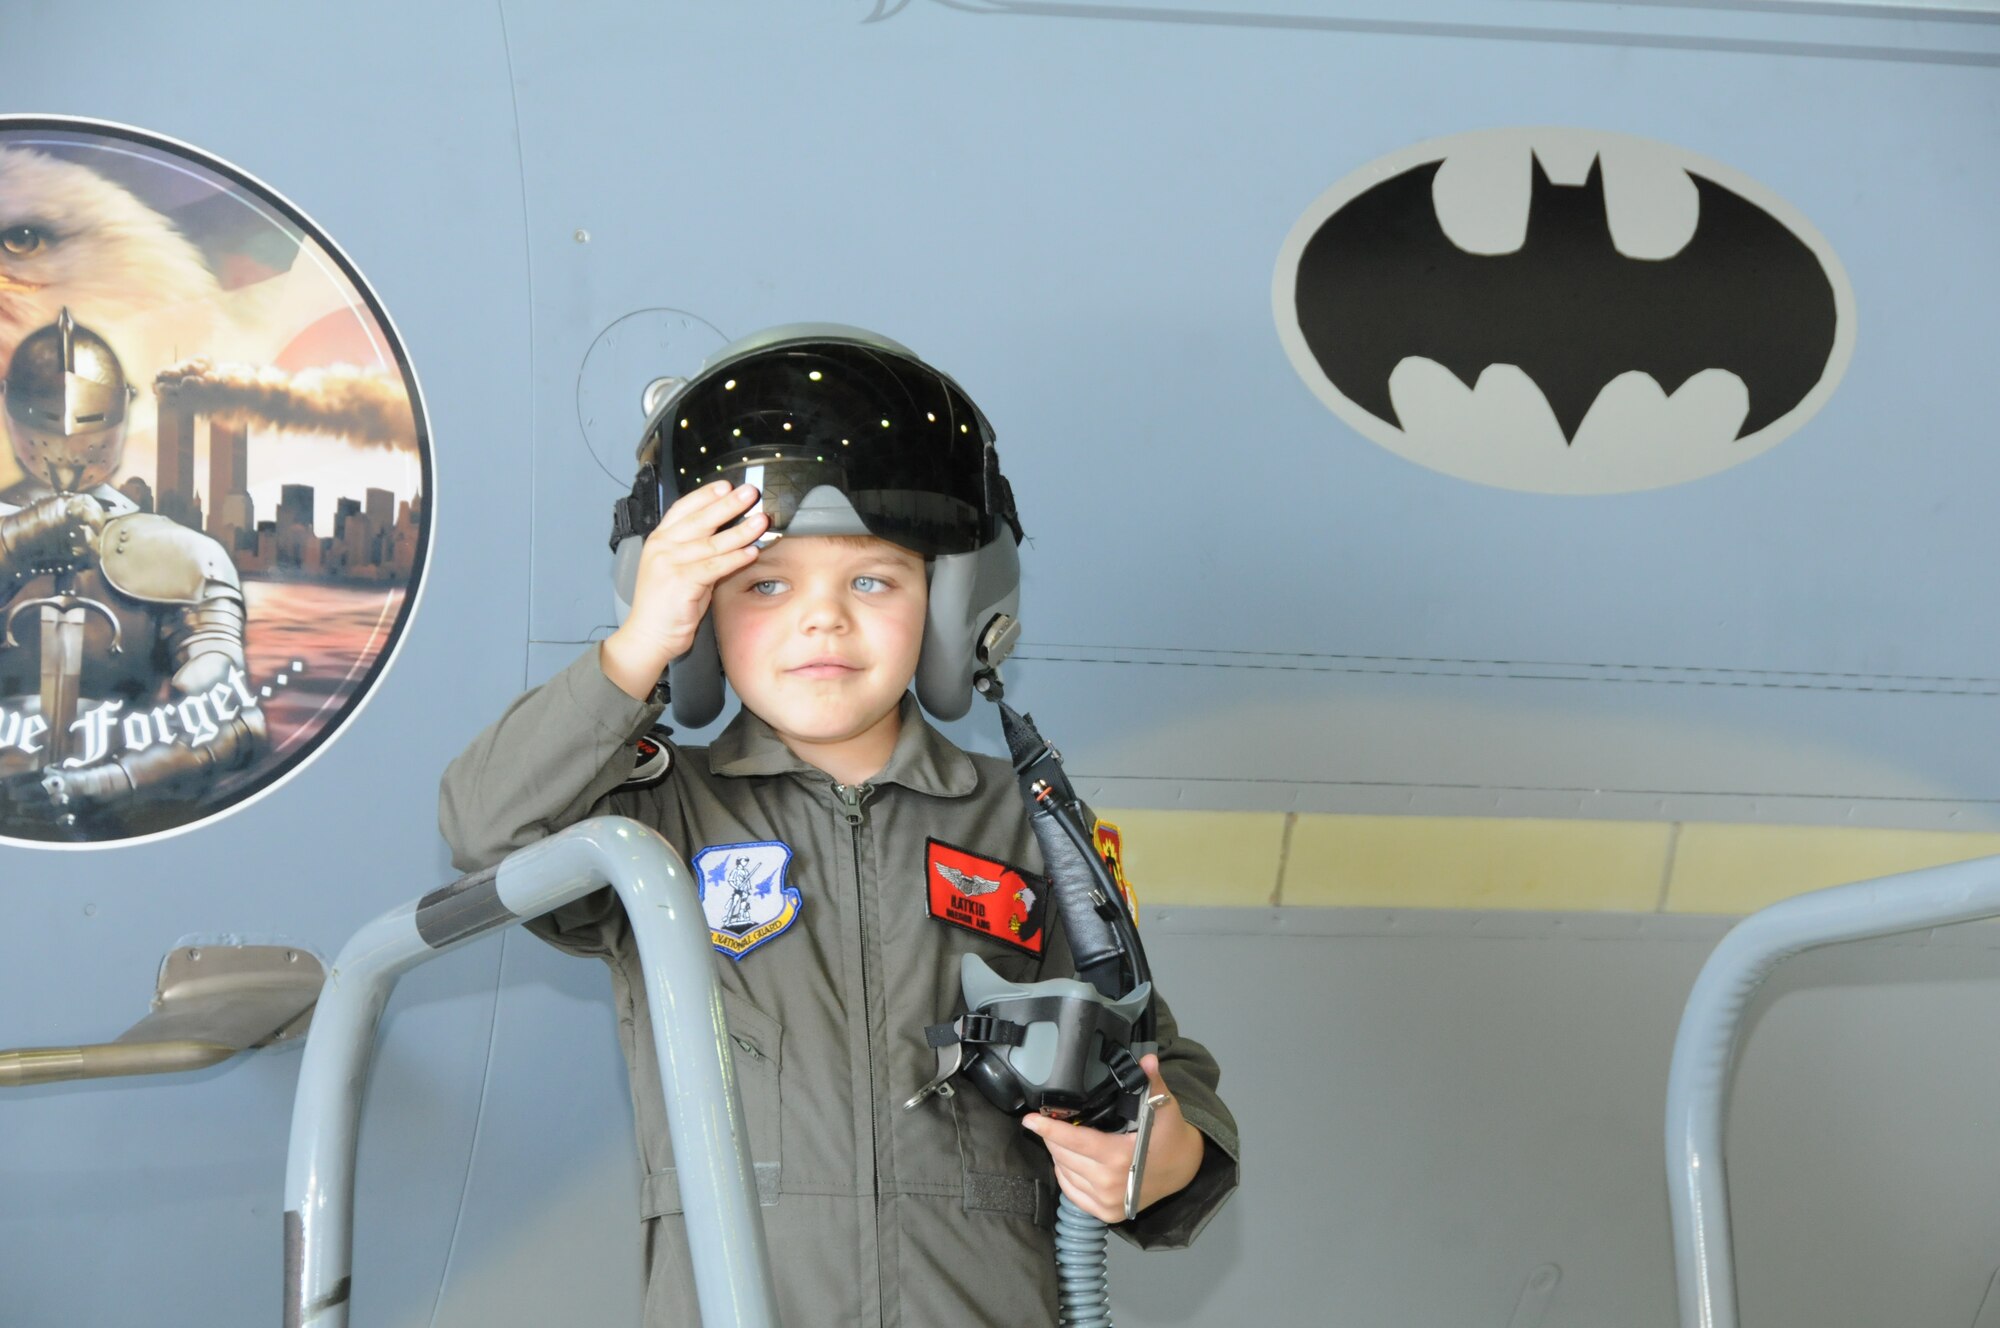 Miles Scott, call sign,“Batkid”, reported for duty at the 173rd Fighter Wing in Klamath Falls, Ore., April 10, 2014. Scott is in remission from leukemia and had the opportunity to be a part of the Fighter Pilot for a Day program hosted by the 114th Fighter Squadron. The jet bears a batman symbol which crew chief Tech. Sgt. Cliff Rutledge had affixed to the jet in honor of Scott’s visit. Scott has battled leukemia and his doctors have recently said he is in remission. (U.S. Air Force photo by Tech. Sgt. Jefferson Thompson/released)